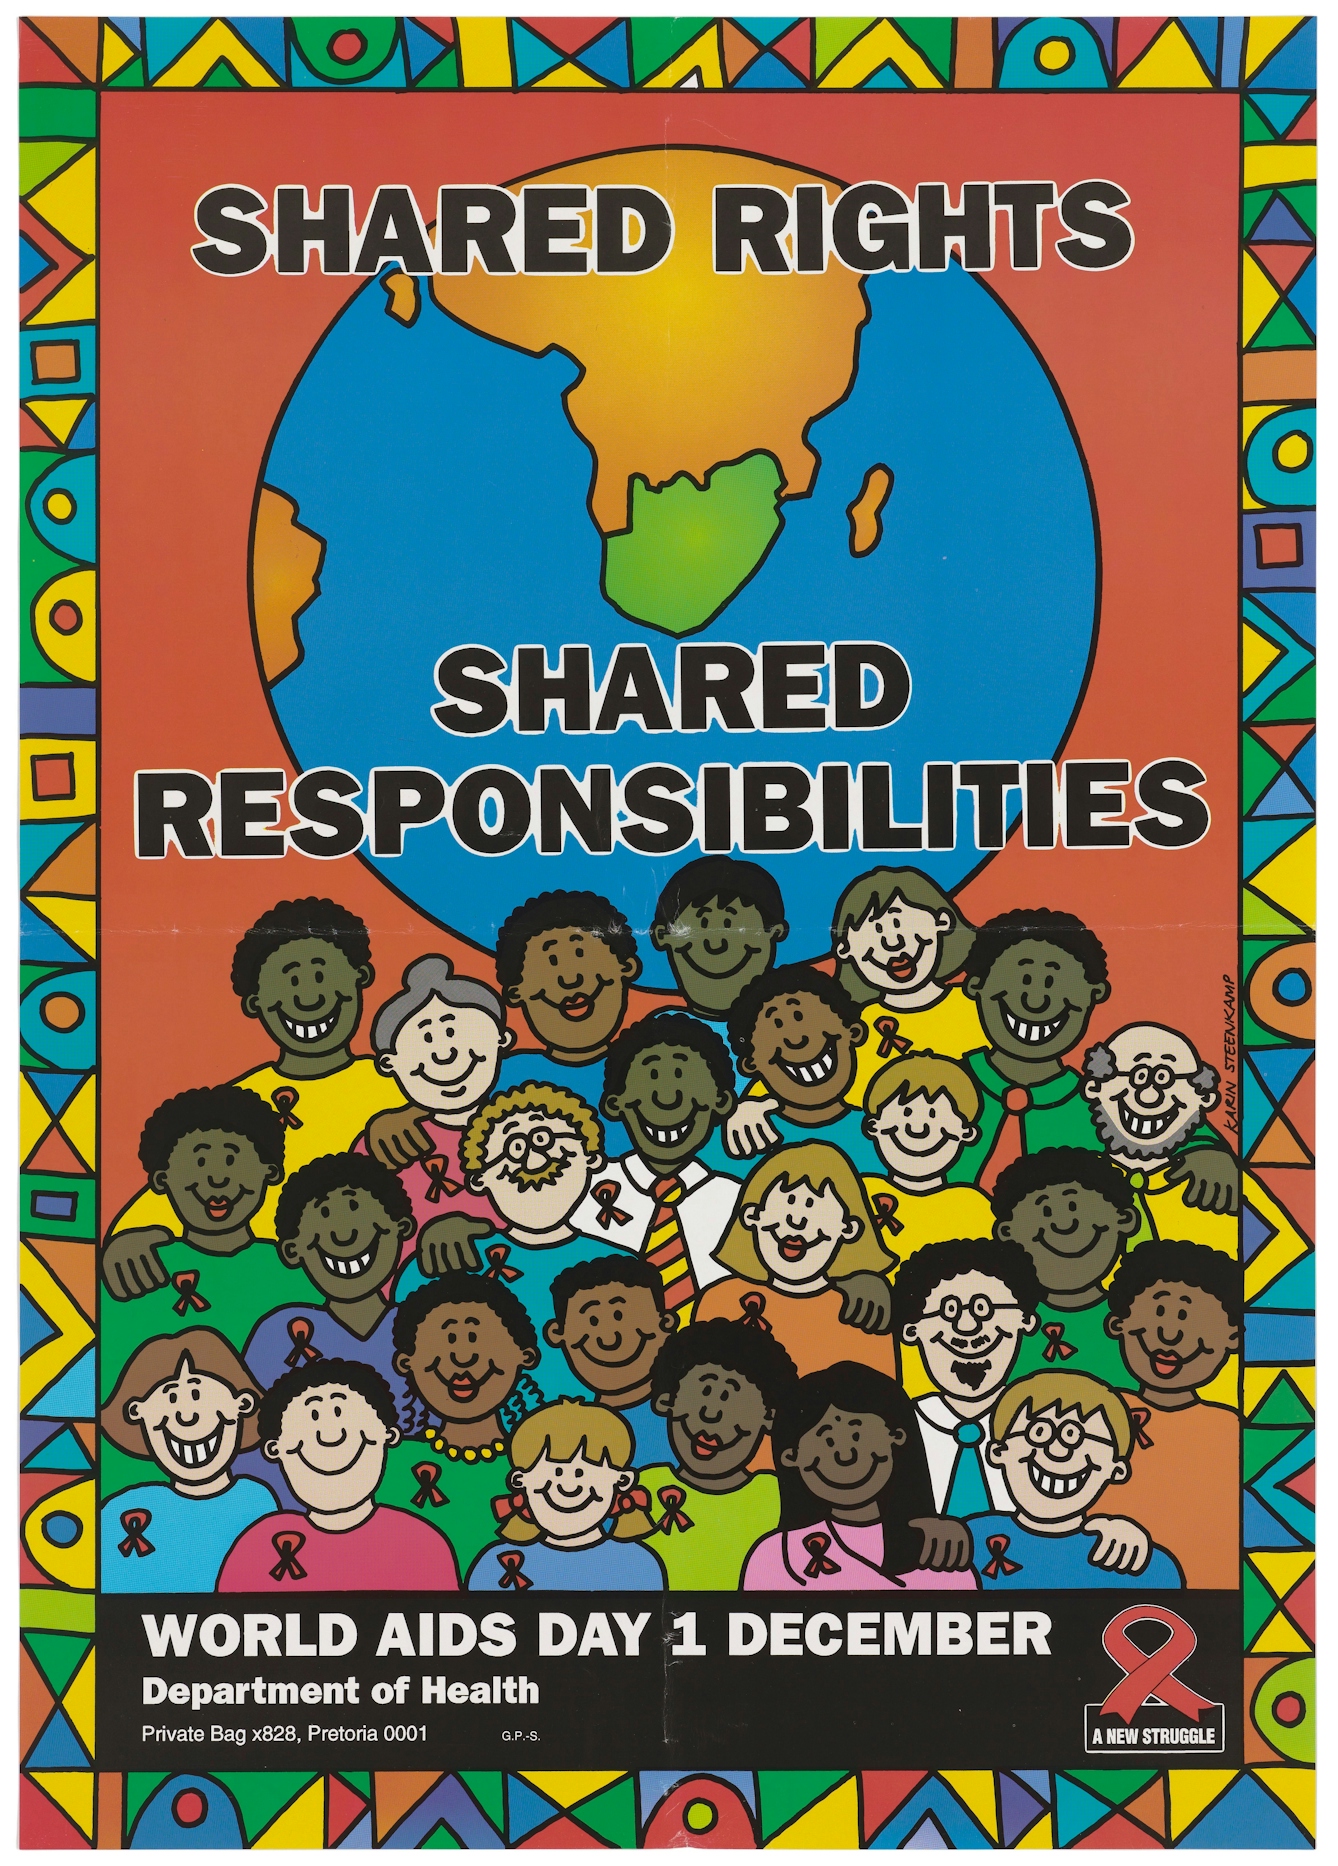 AIDS poster reading 'Shared rights, shared responsibilities' for World AIDS Day on 1 December. Illustration of about 20 smiling people.